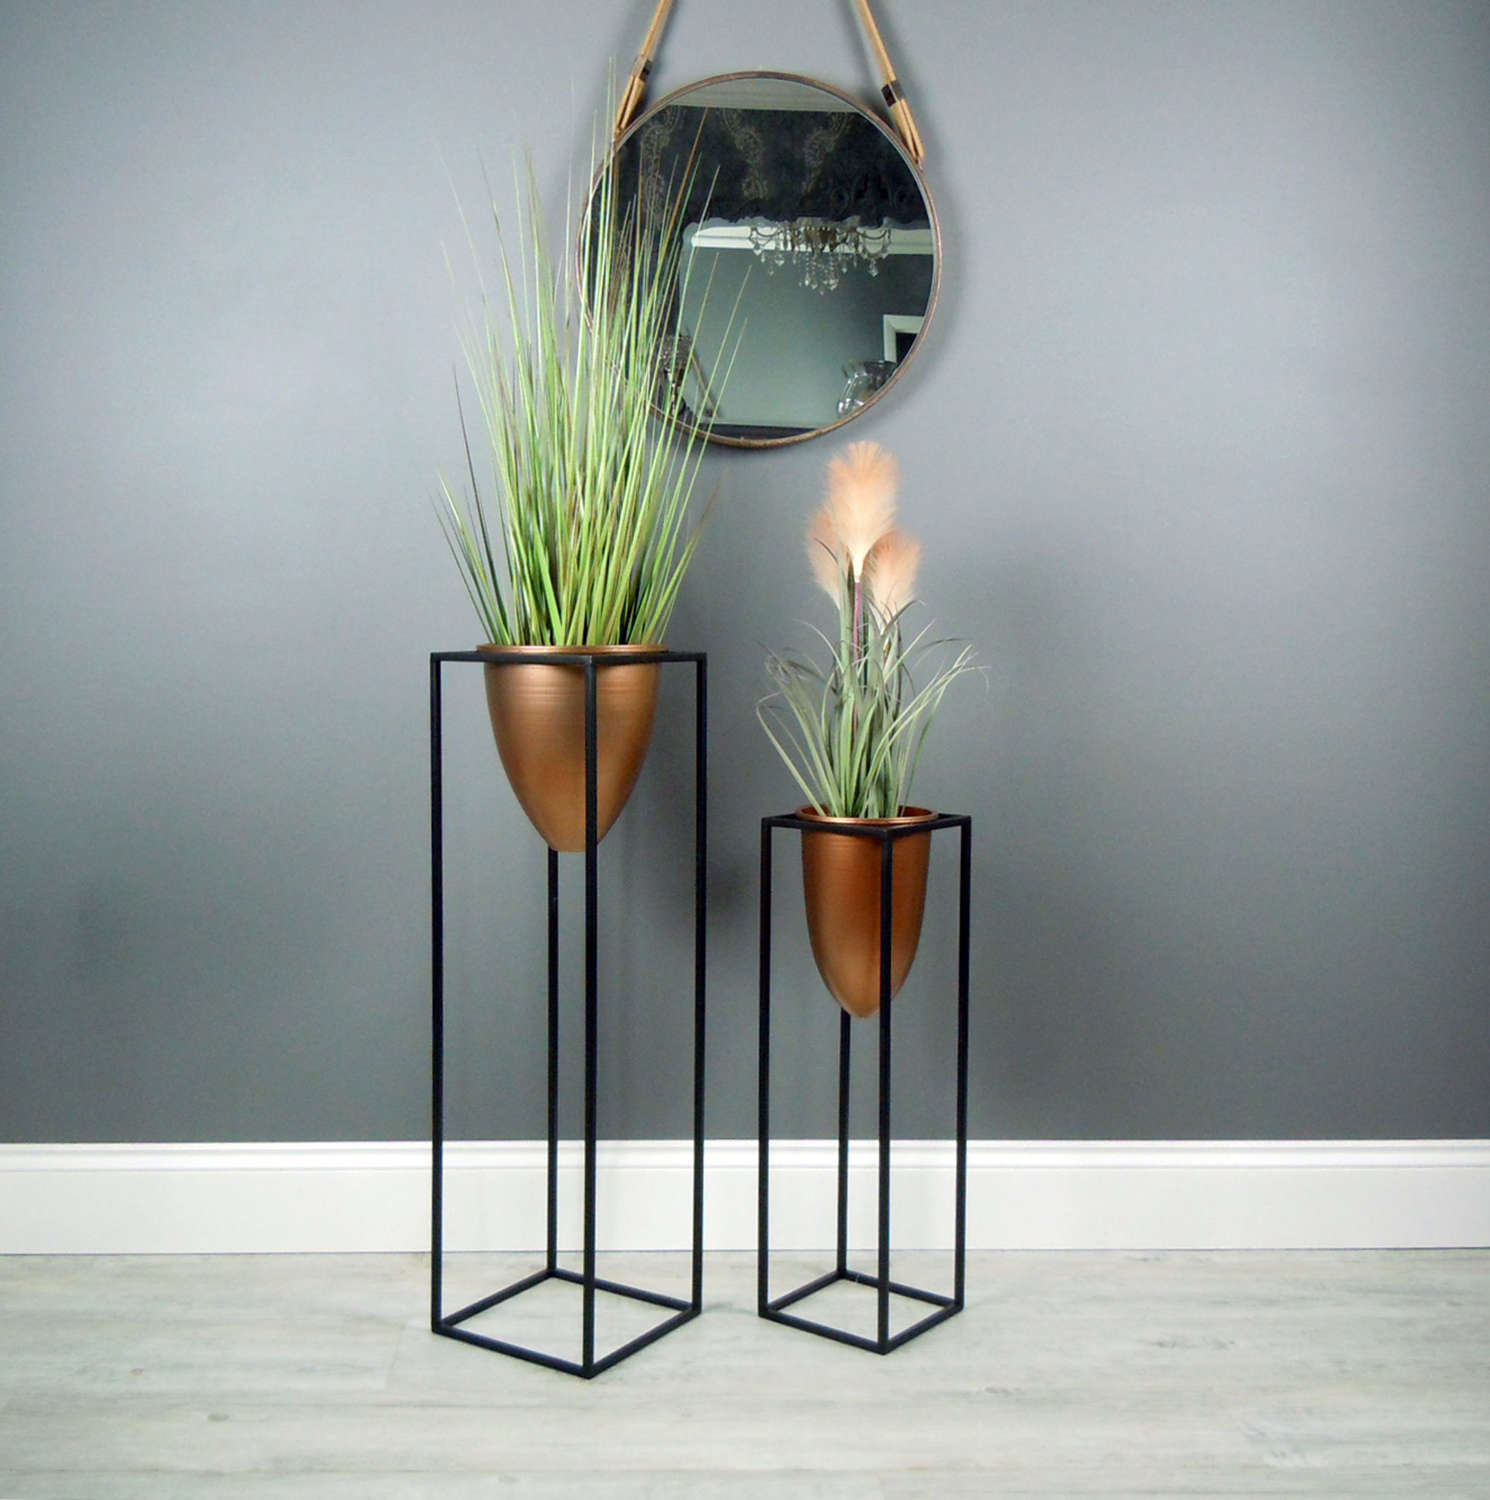 Copper bullet planter on stand